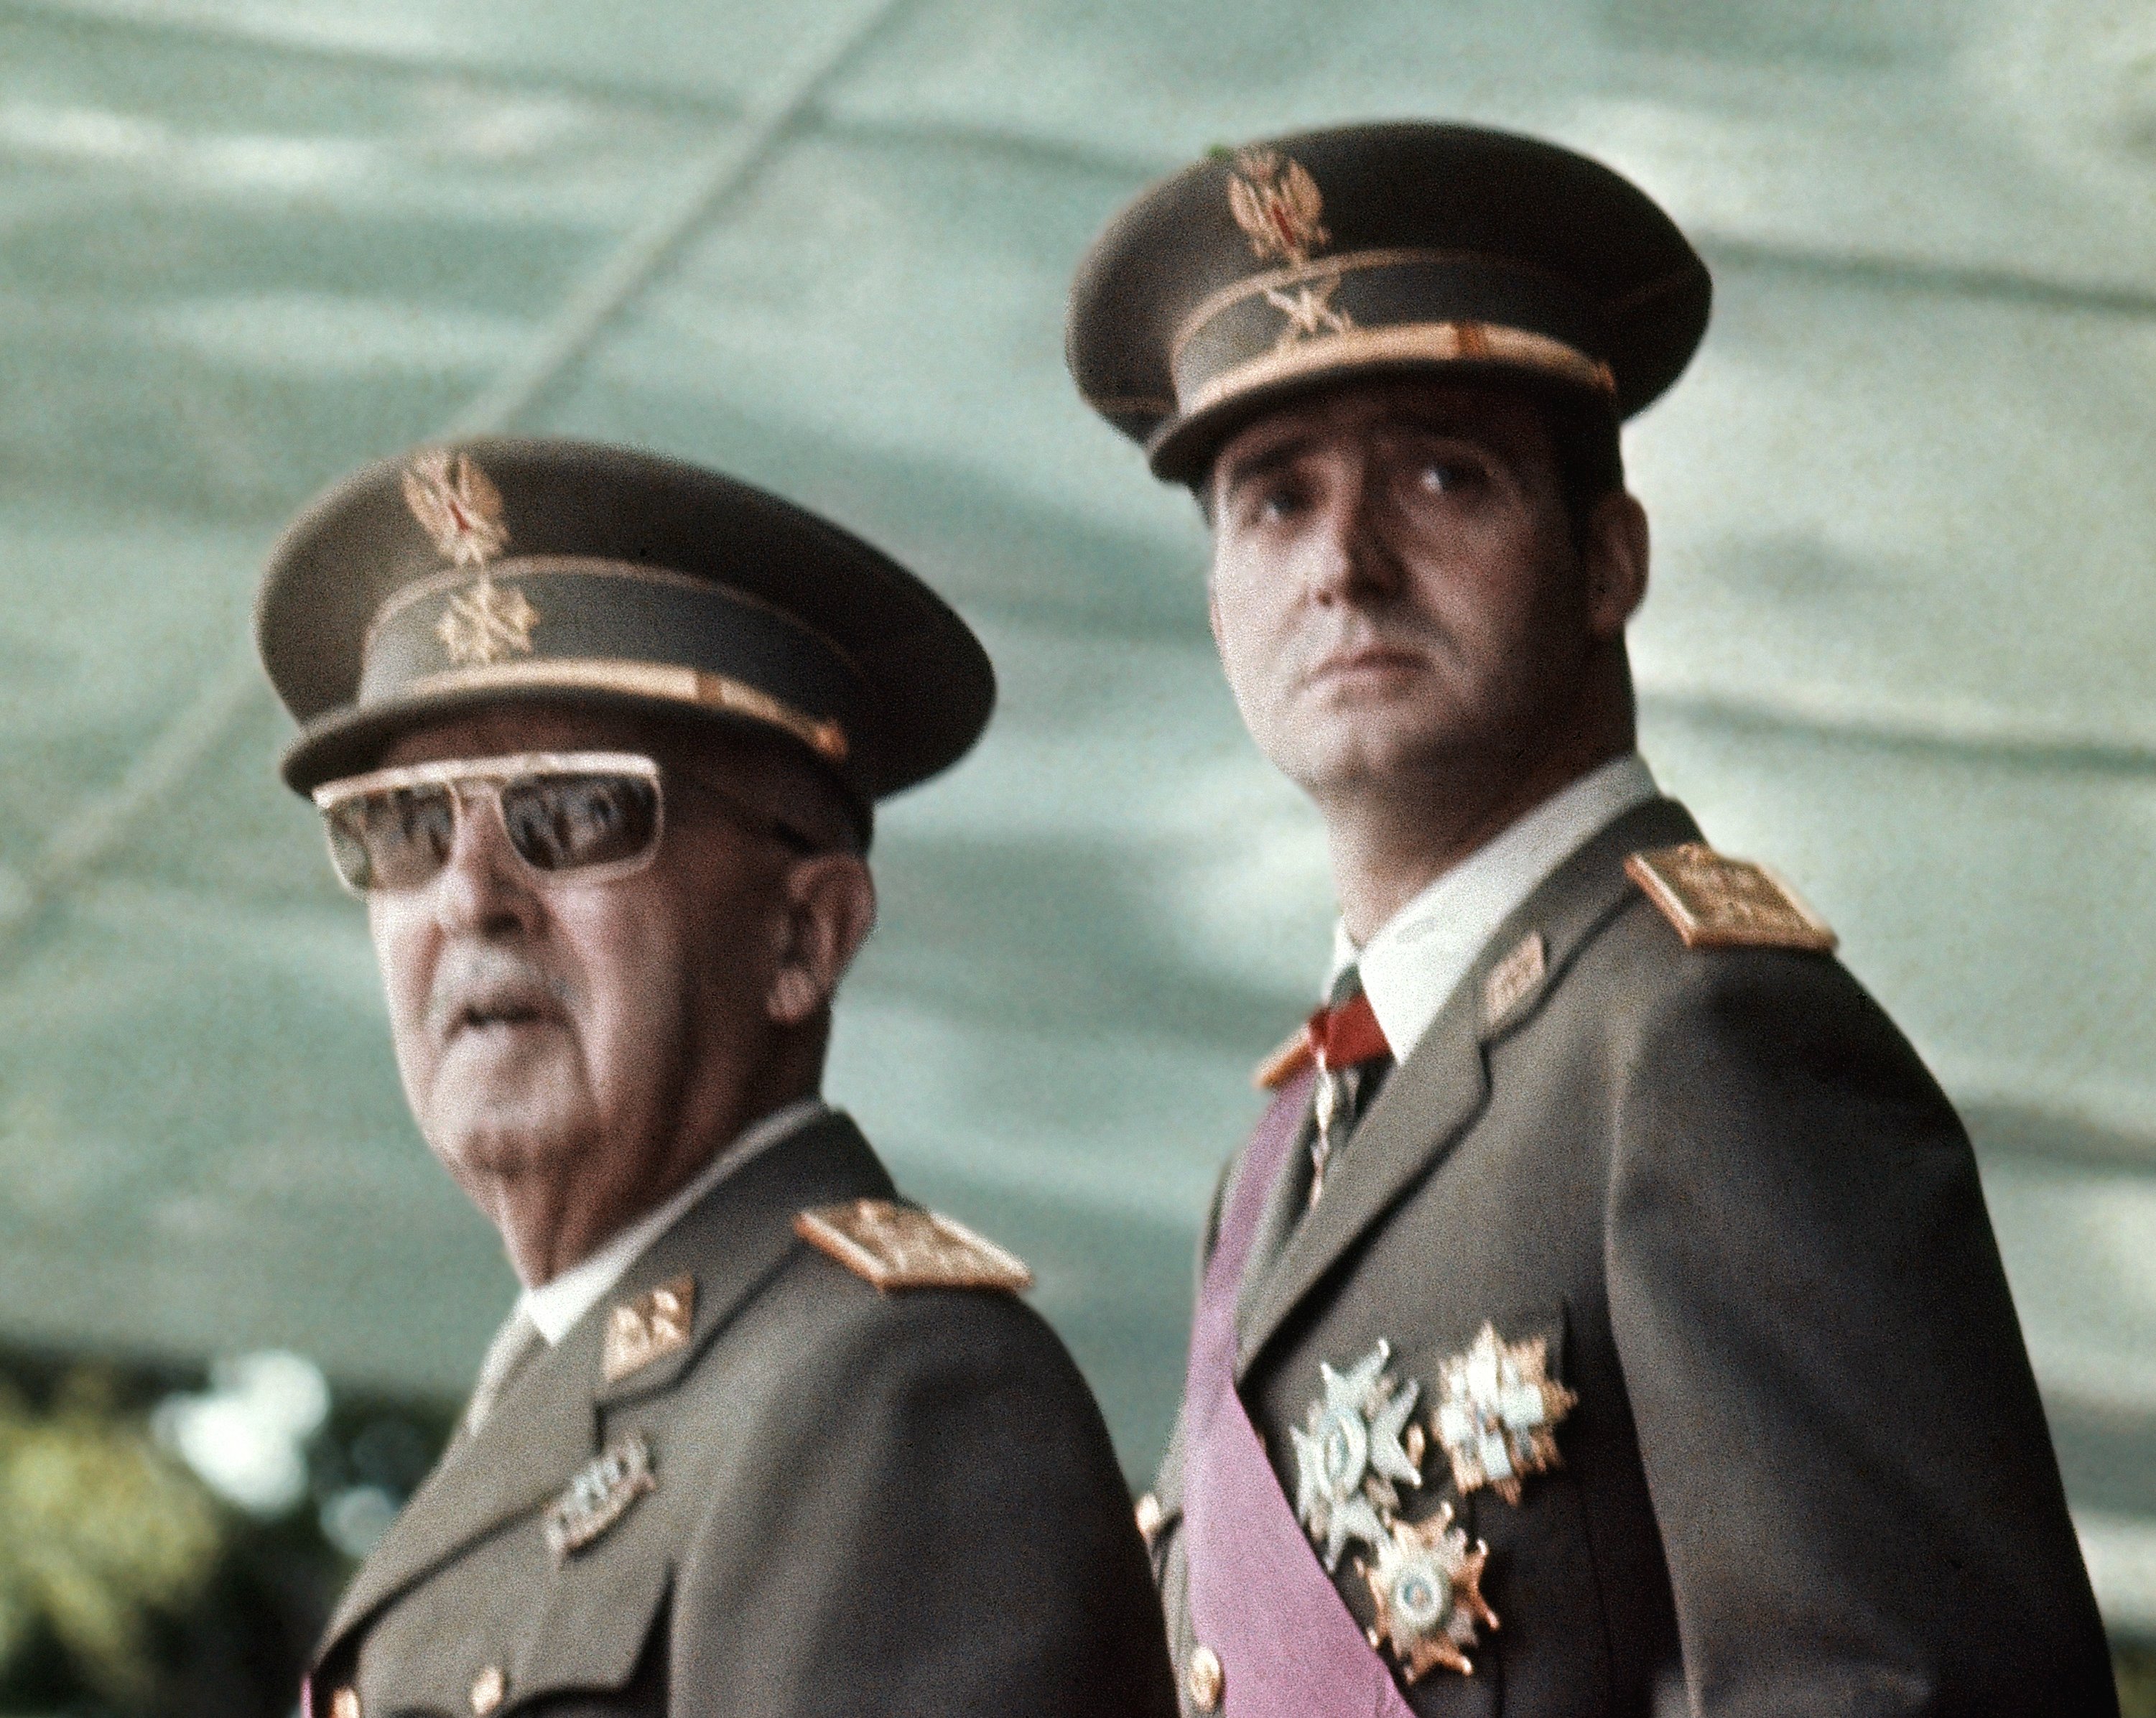 Spanish PM takes last step to exhume Franco after announcing snap election